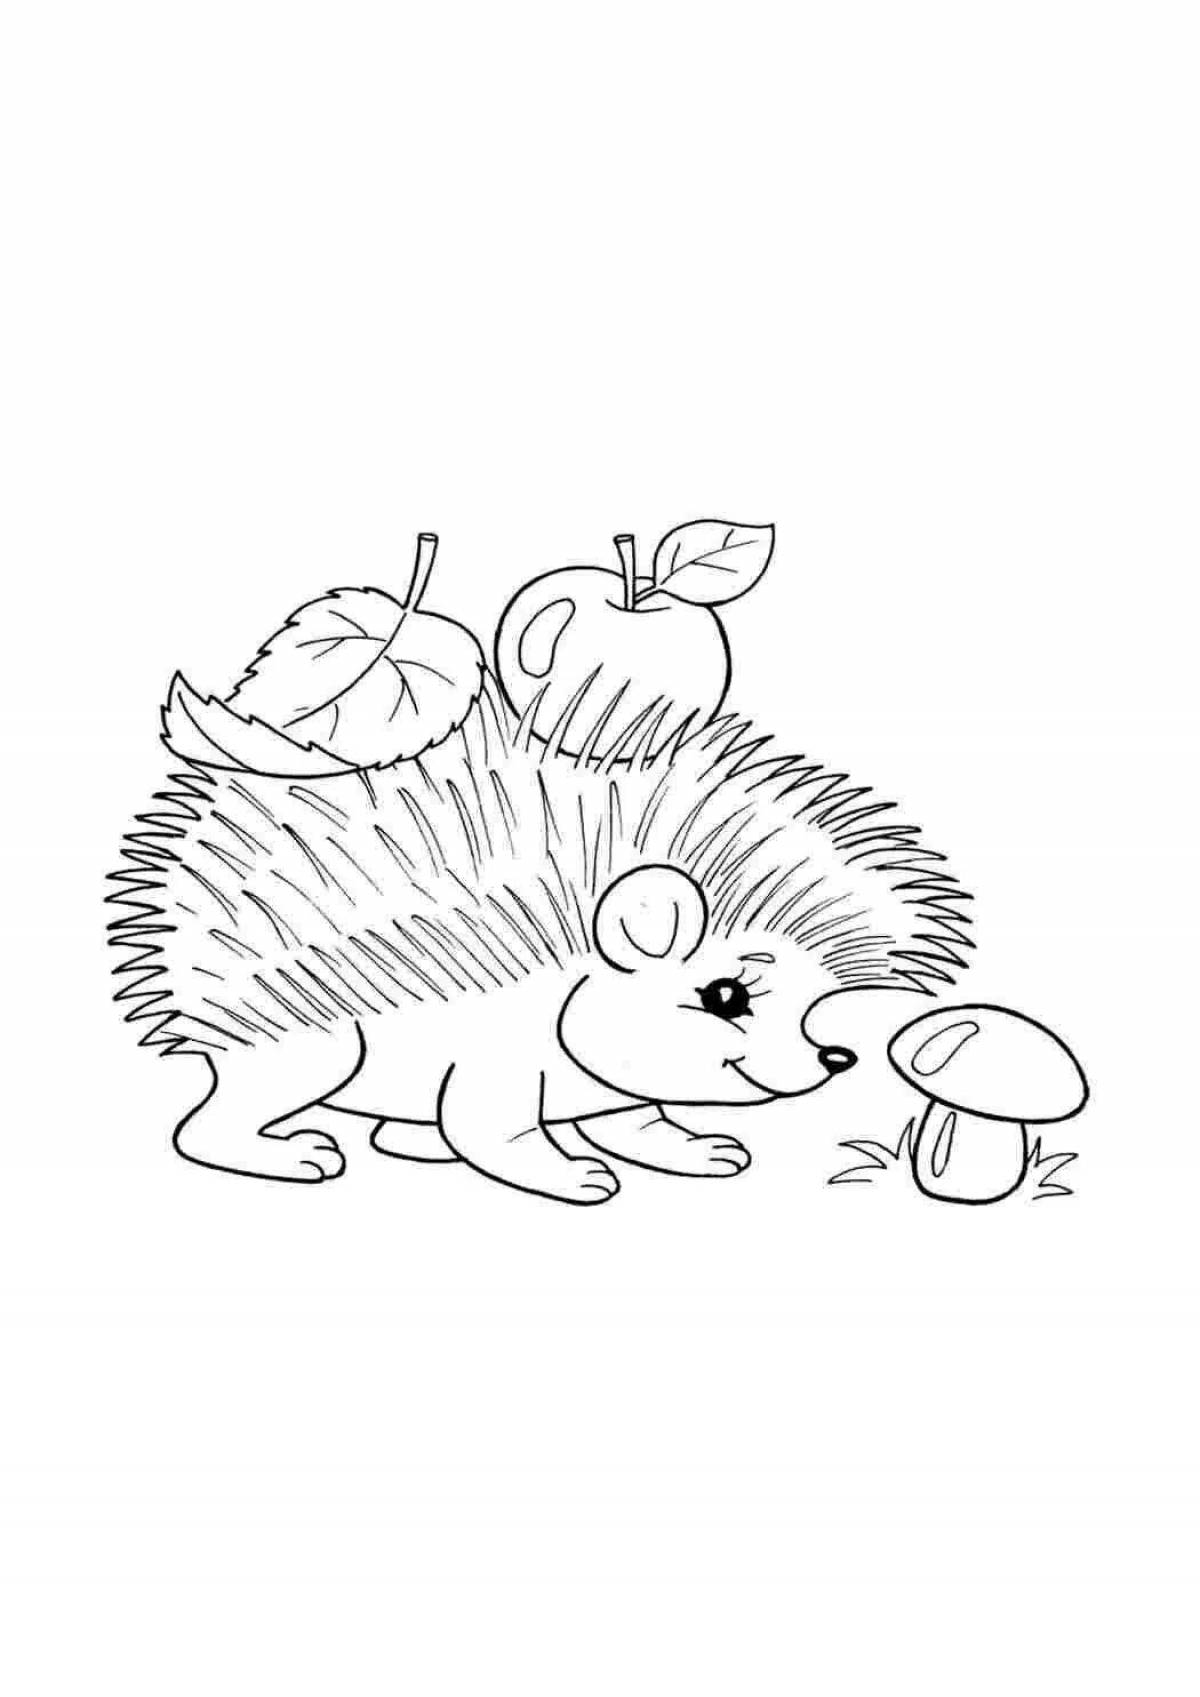 A graceful hedgehog in the forest